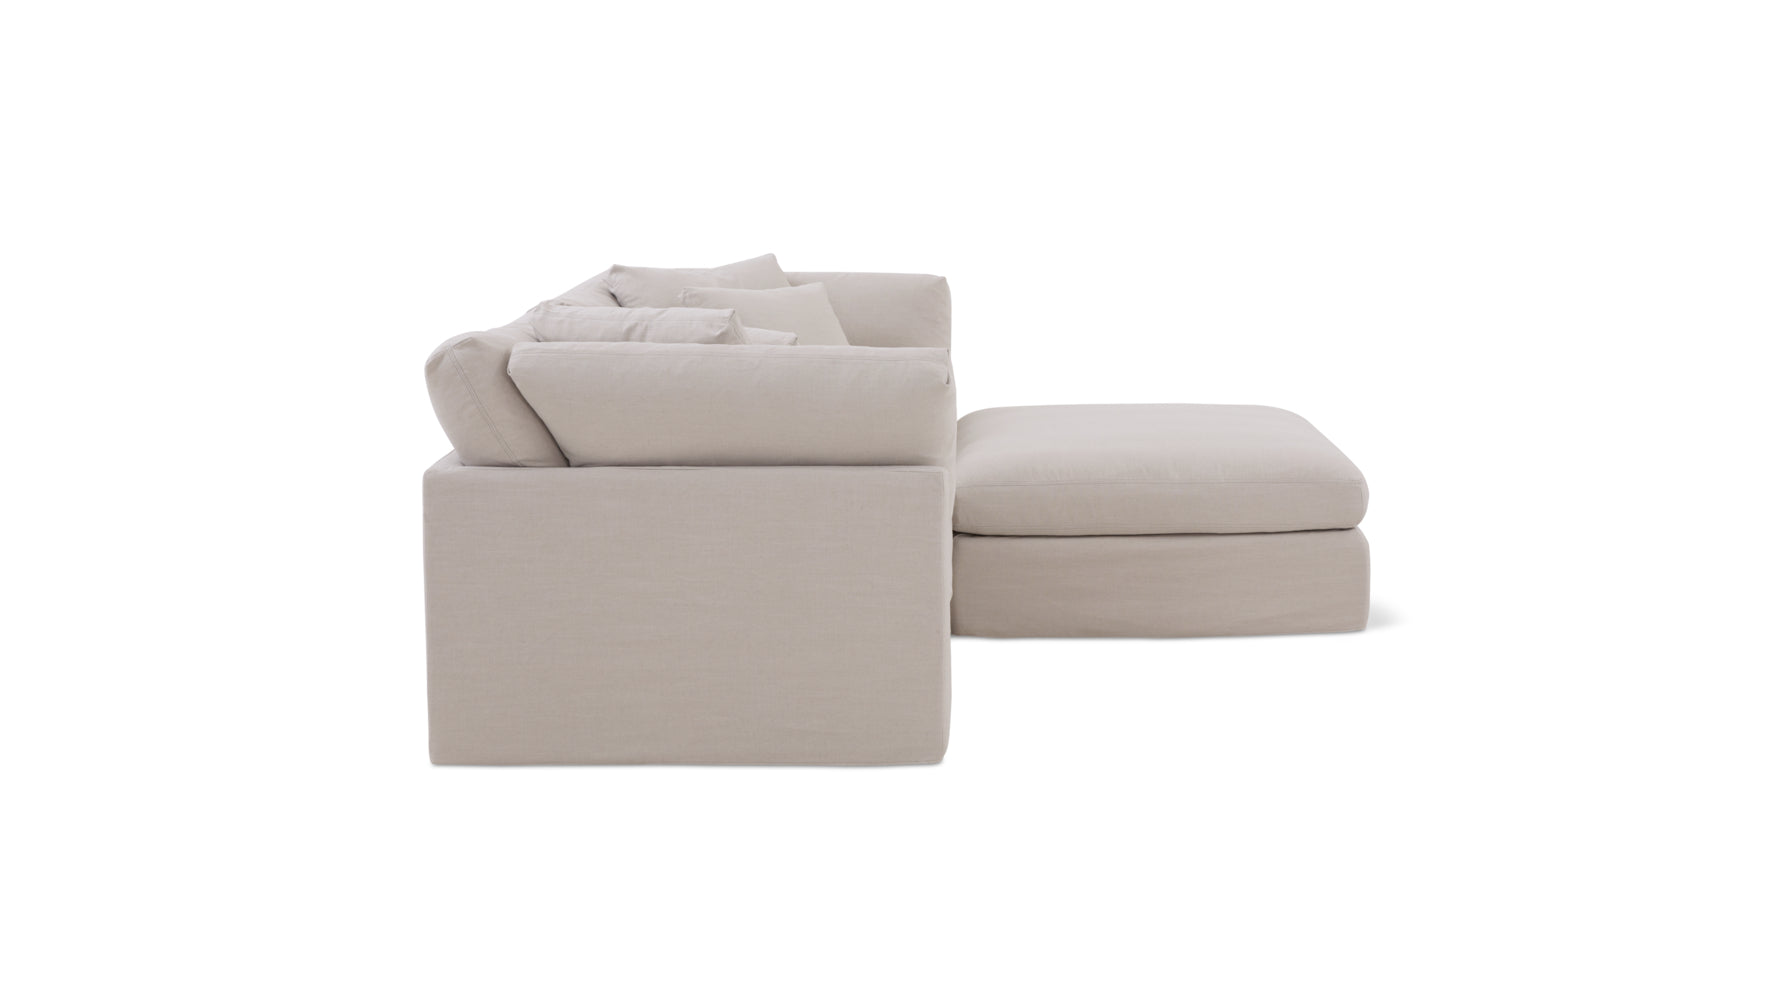 Get Together™ 3-Piece Modular Sectional, Large, Clay - Image 5